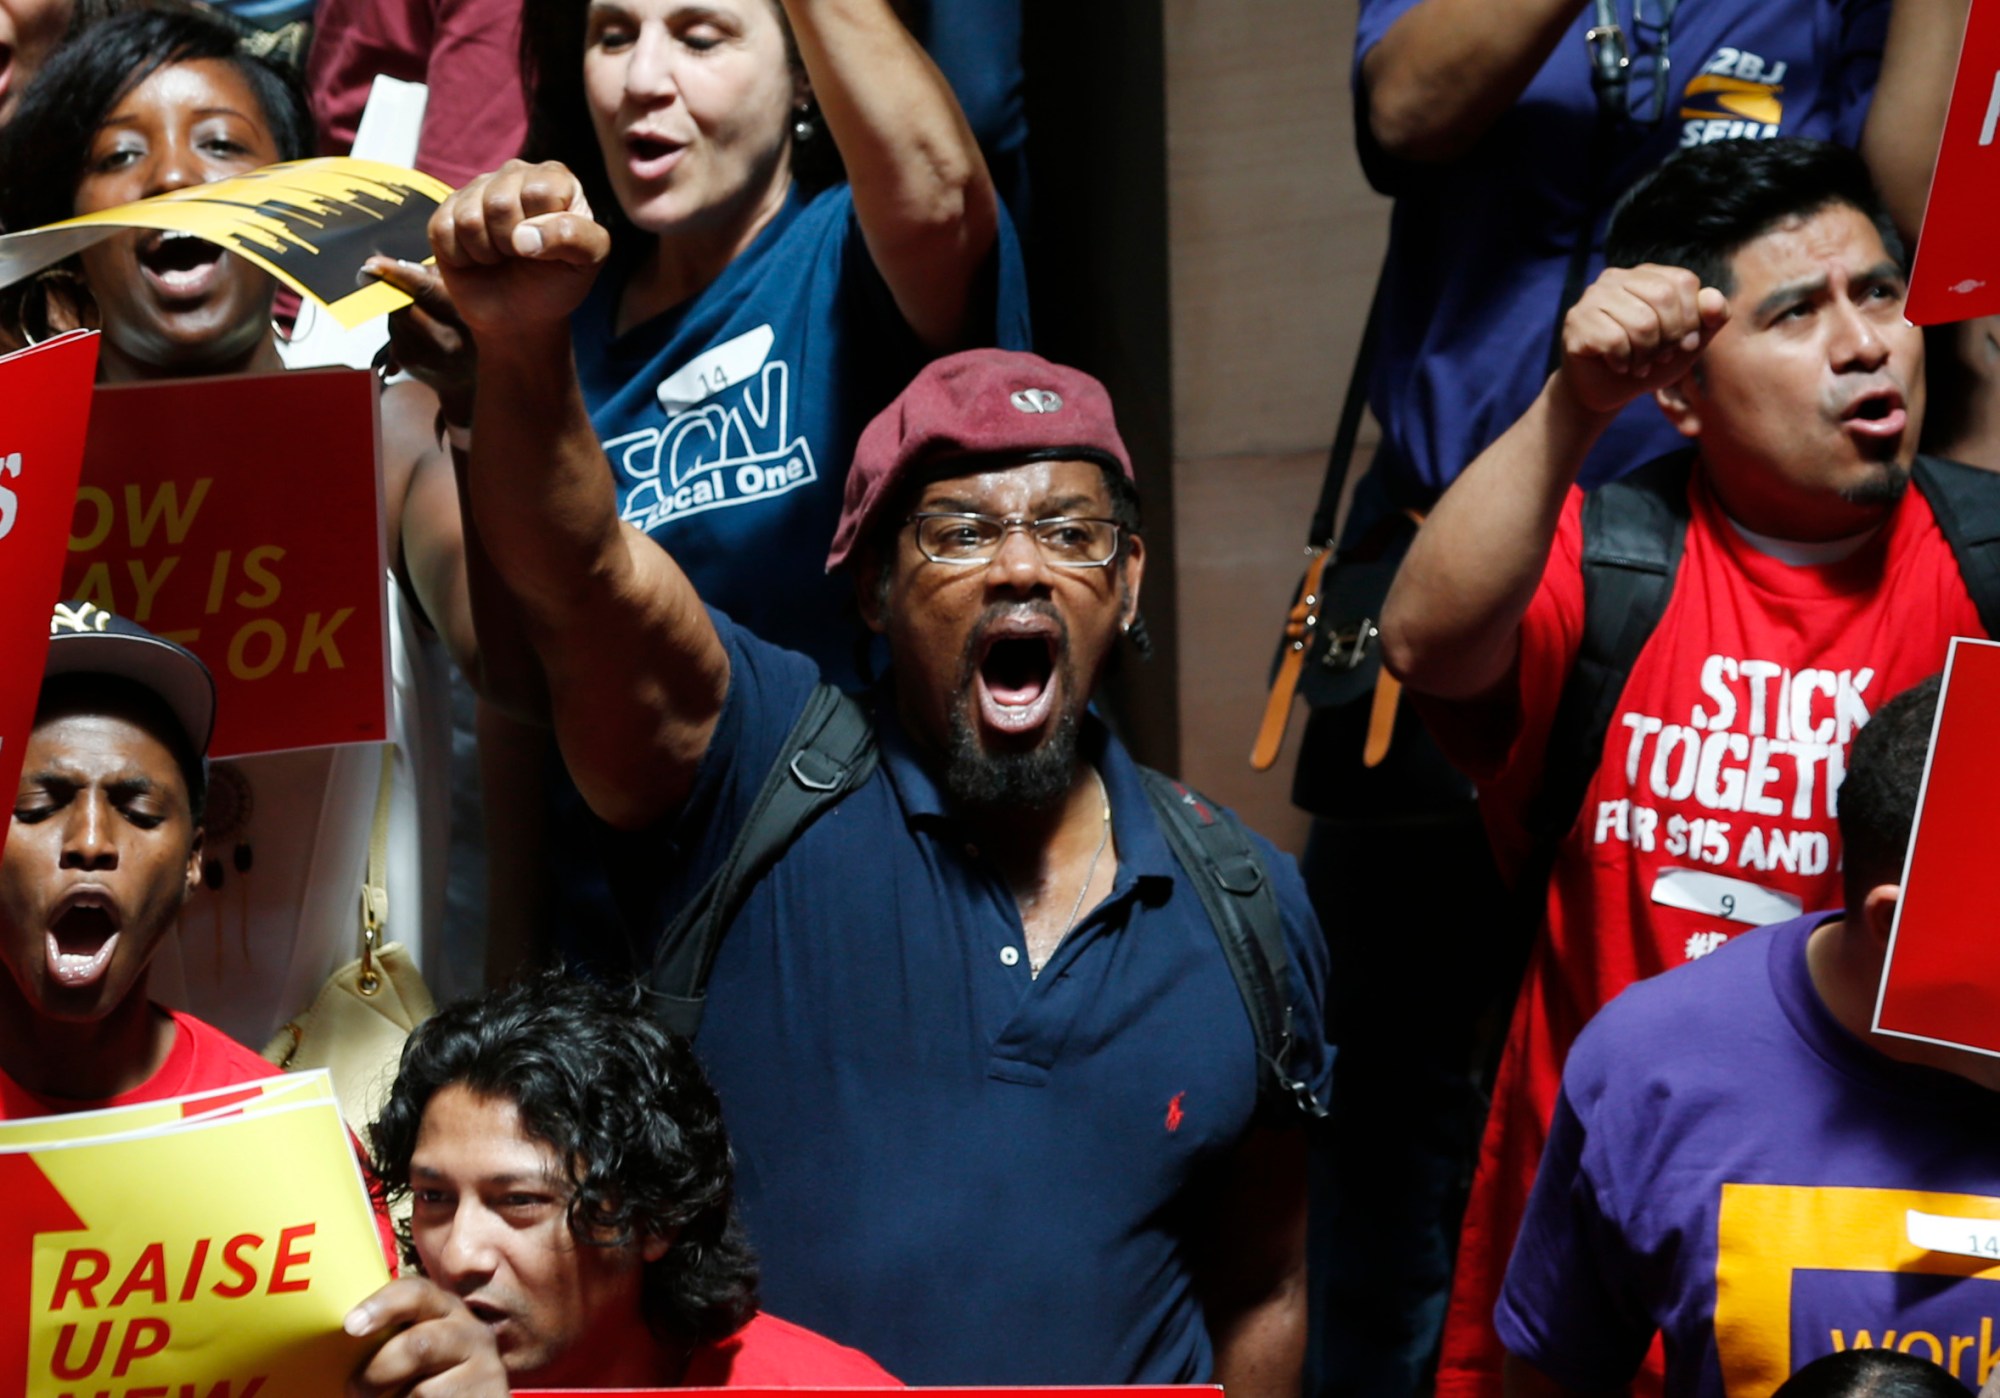 People rally for an increase in the minimum wage in Albany, New York. (AP/Mike Groll)